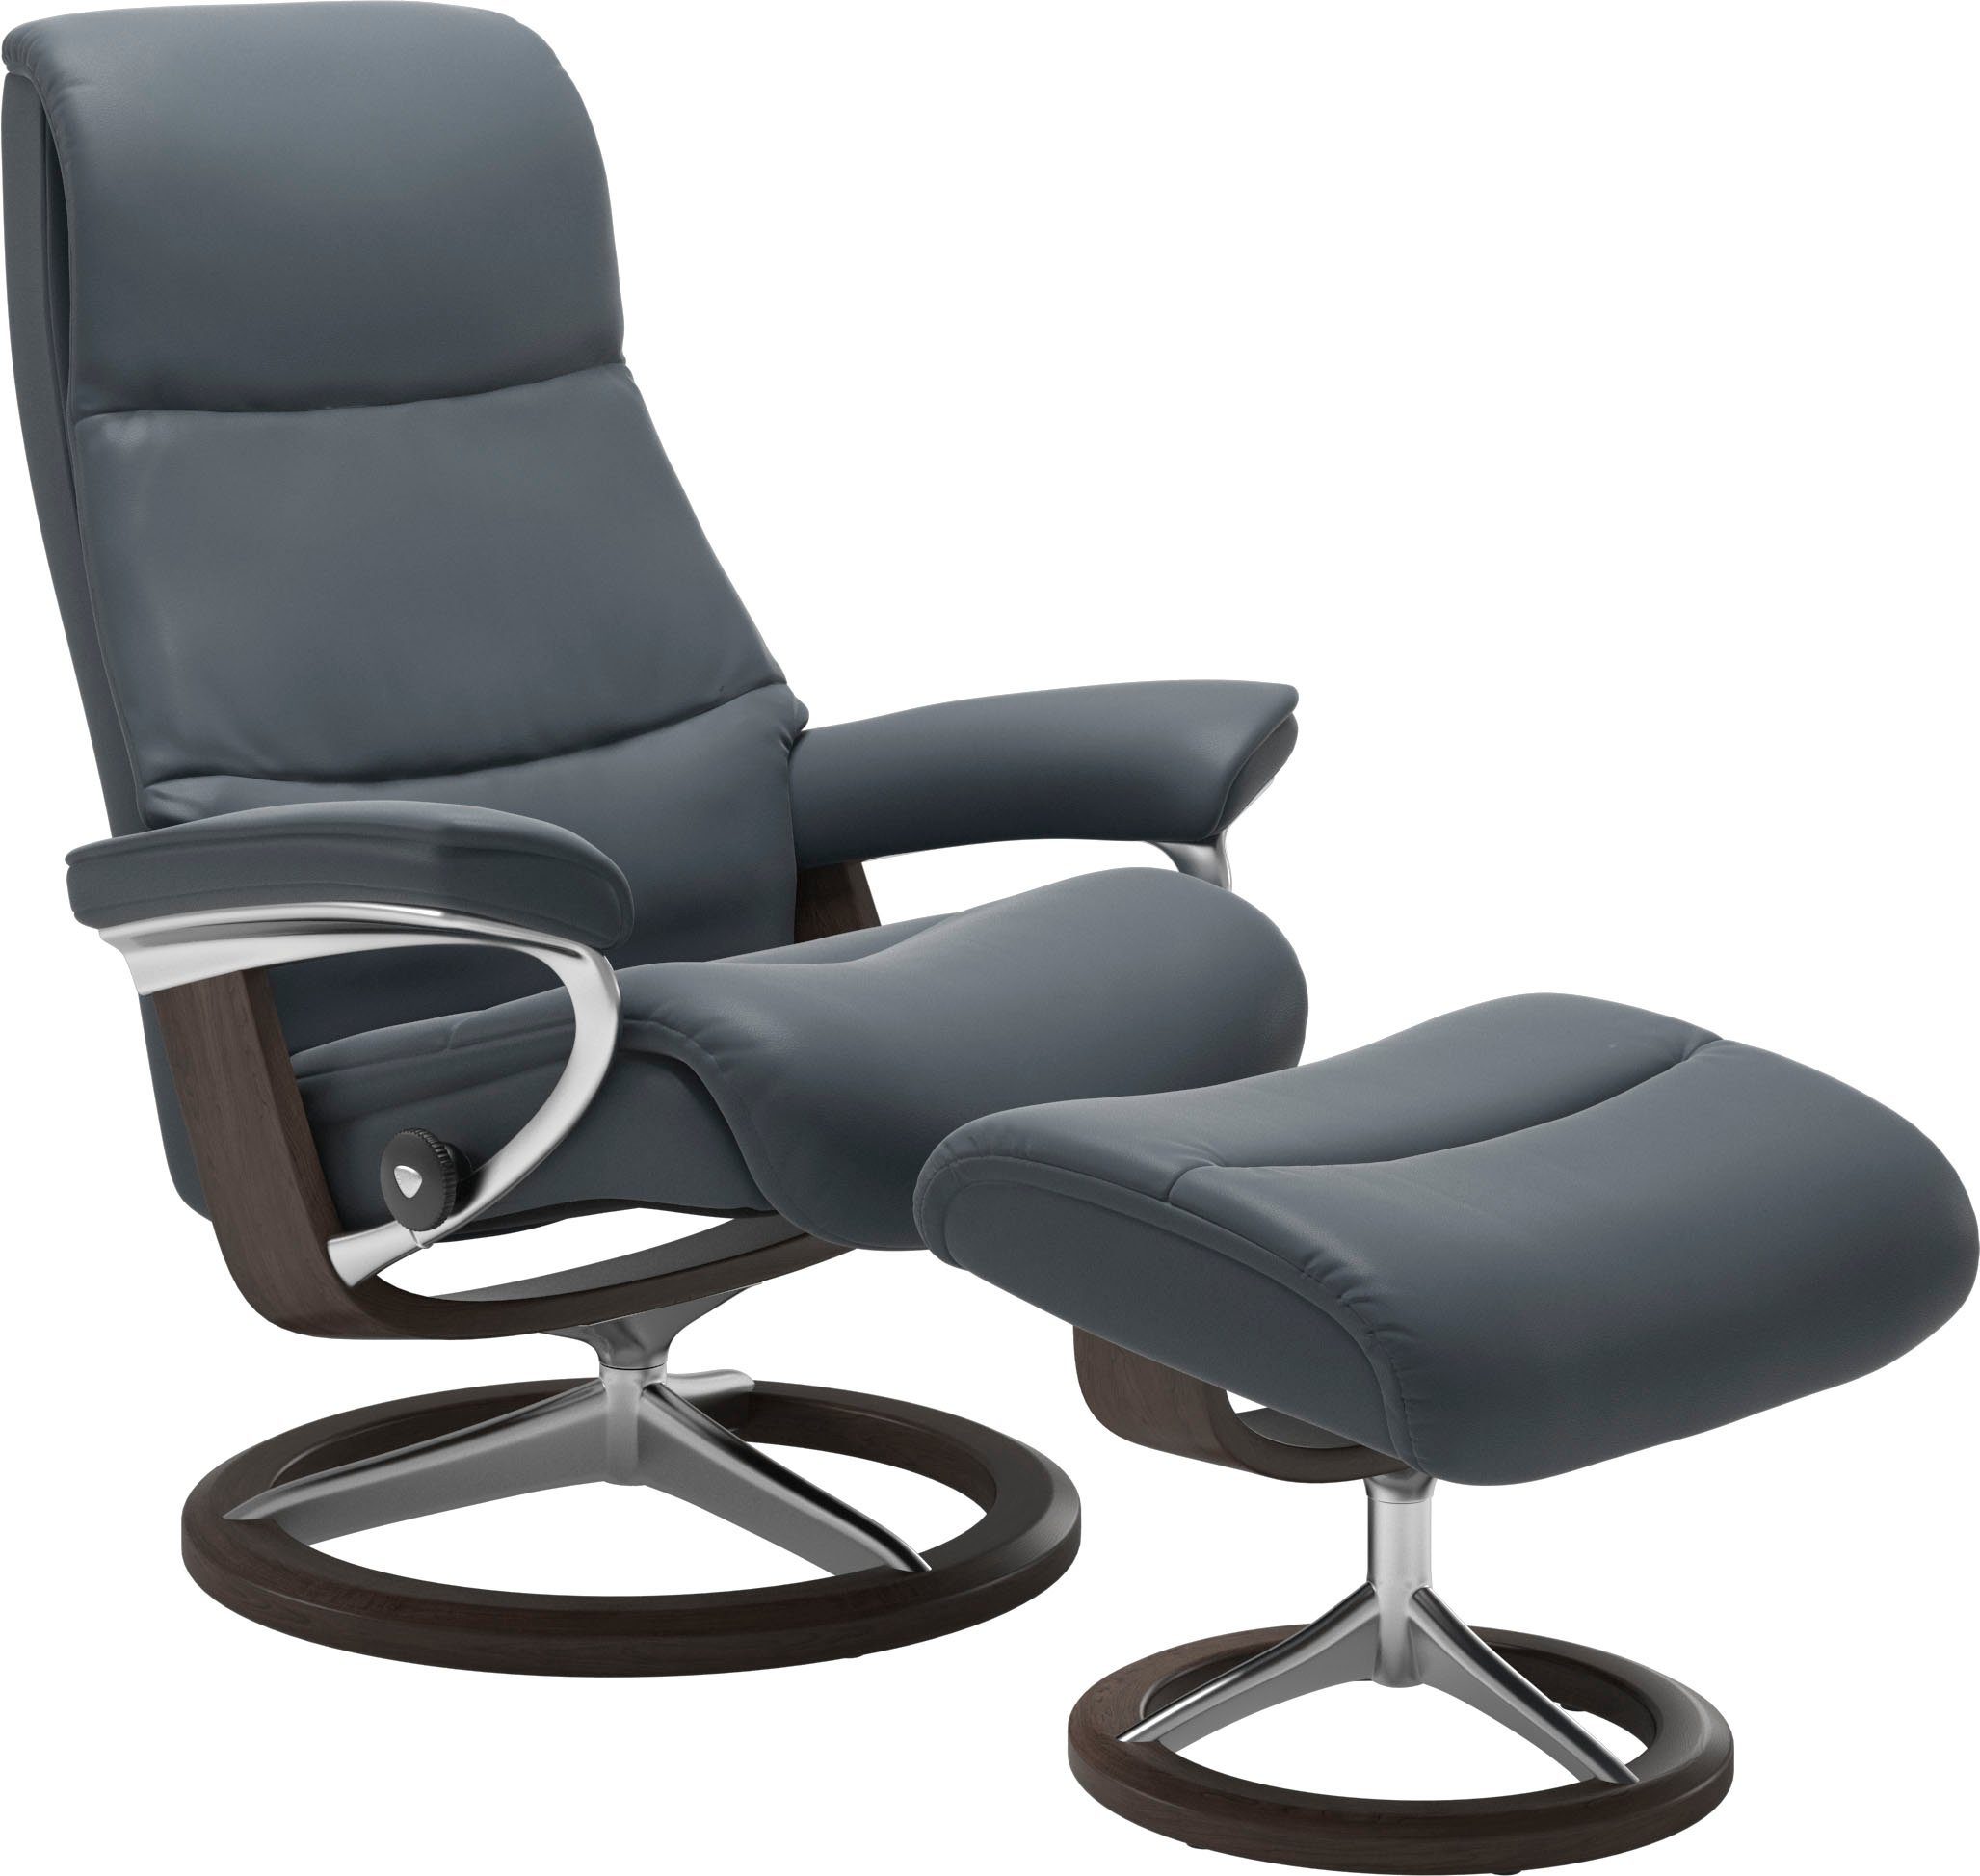 Wenge View, Stressless® Relaxsessel Größe Base, Signature L,Gestell mit